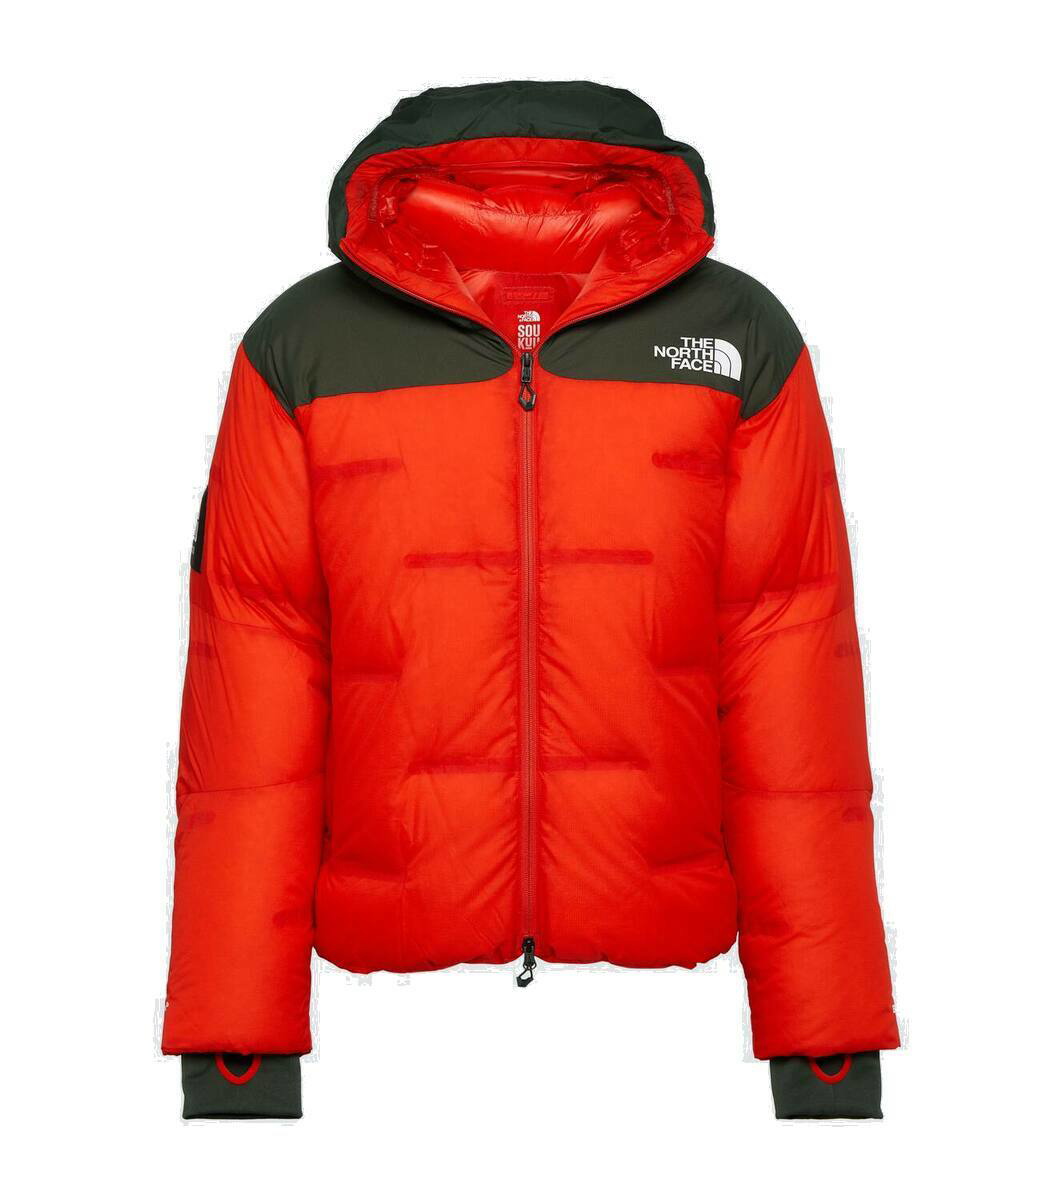 The North Face x Undercover Soukuu down jacket The North Face